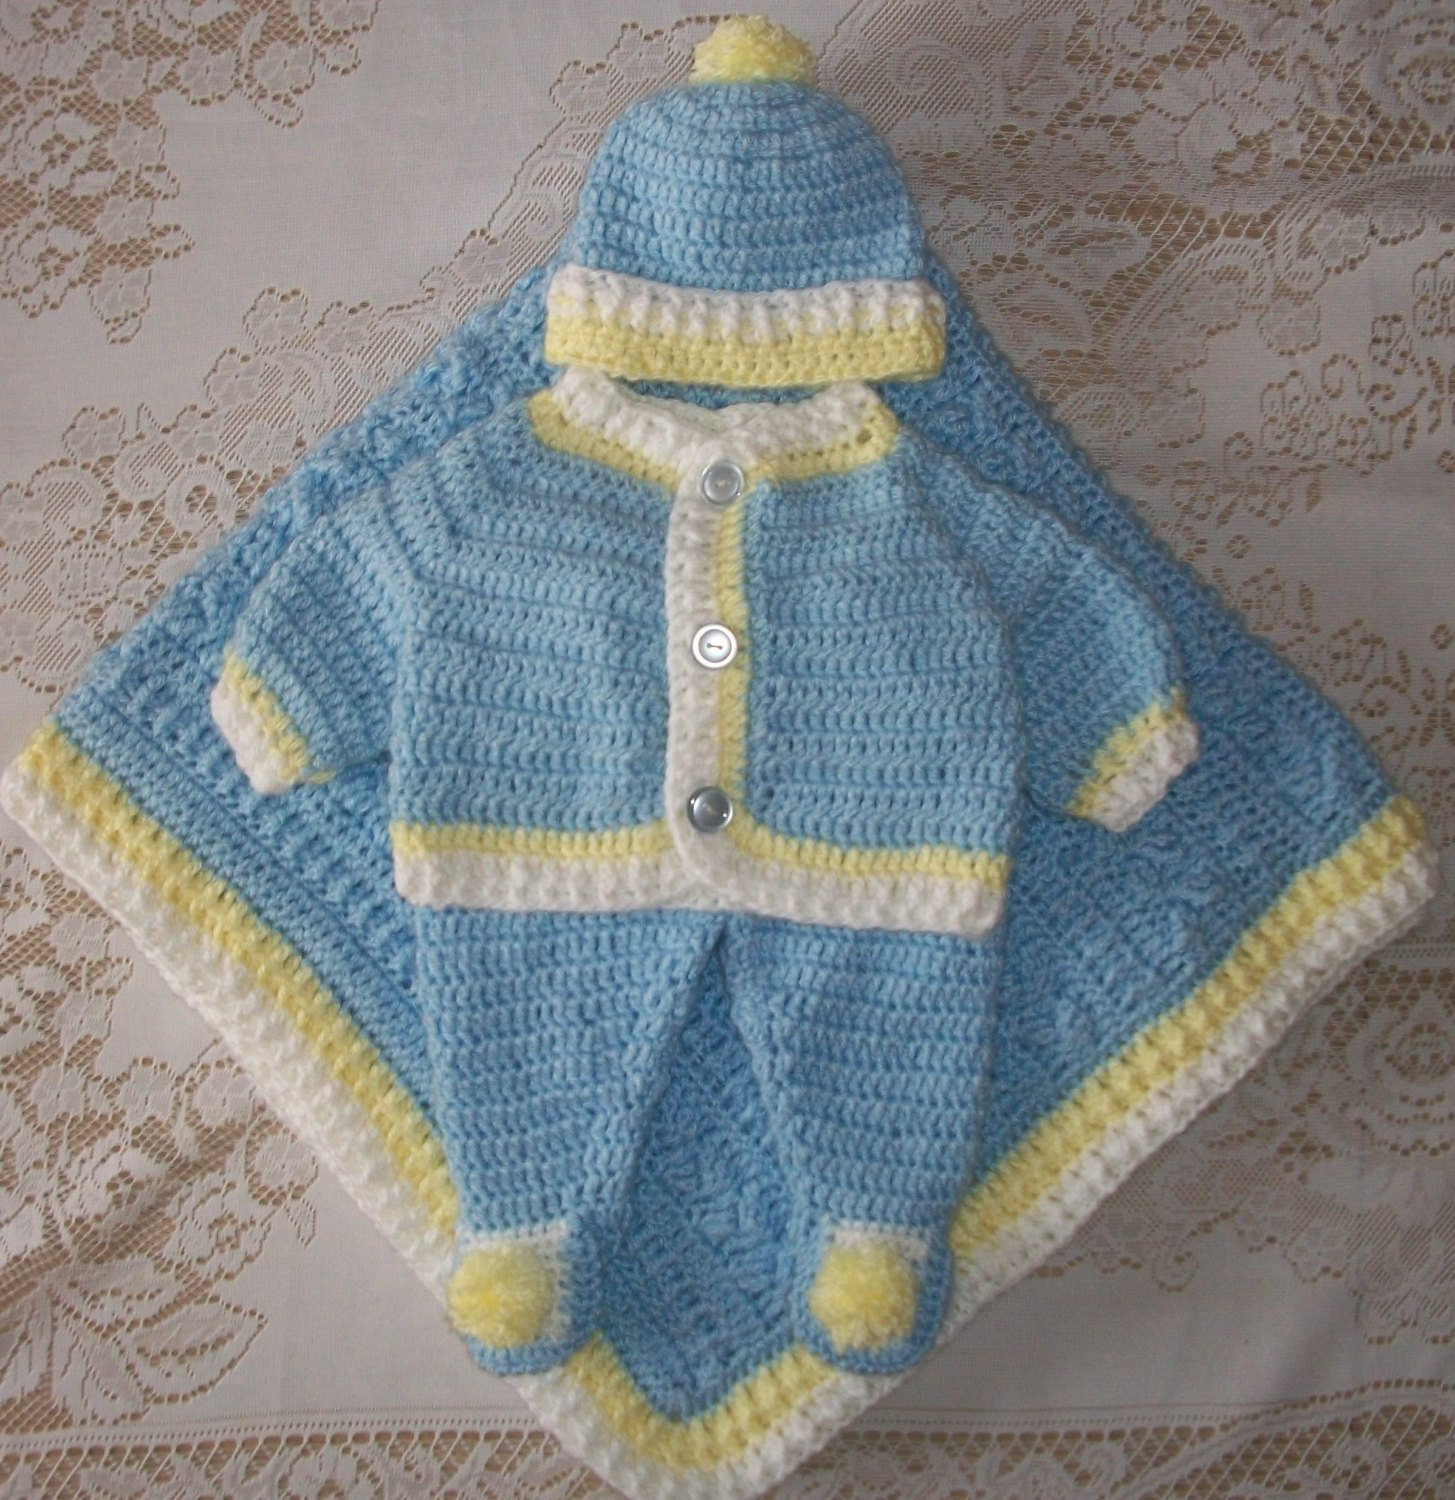 Crochet Baby Boy Sweater Pattern Free Crochet Ba Boy Sweater Set Layette Outfit With Cable Blanket Etsy